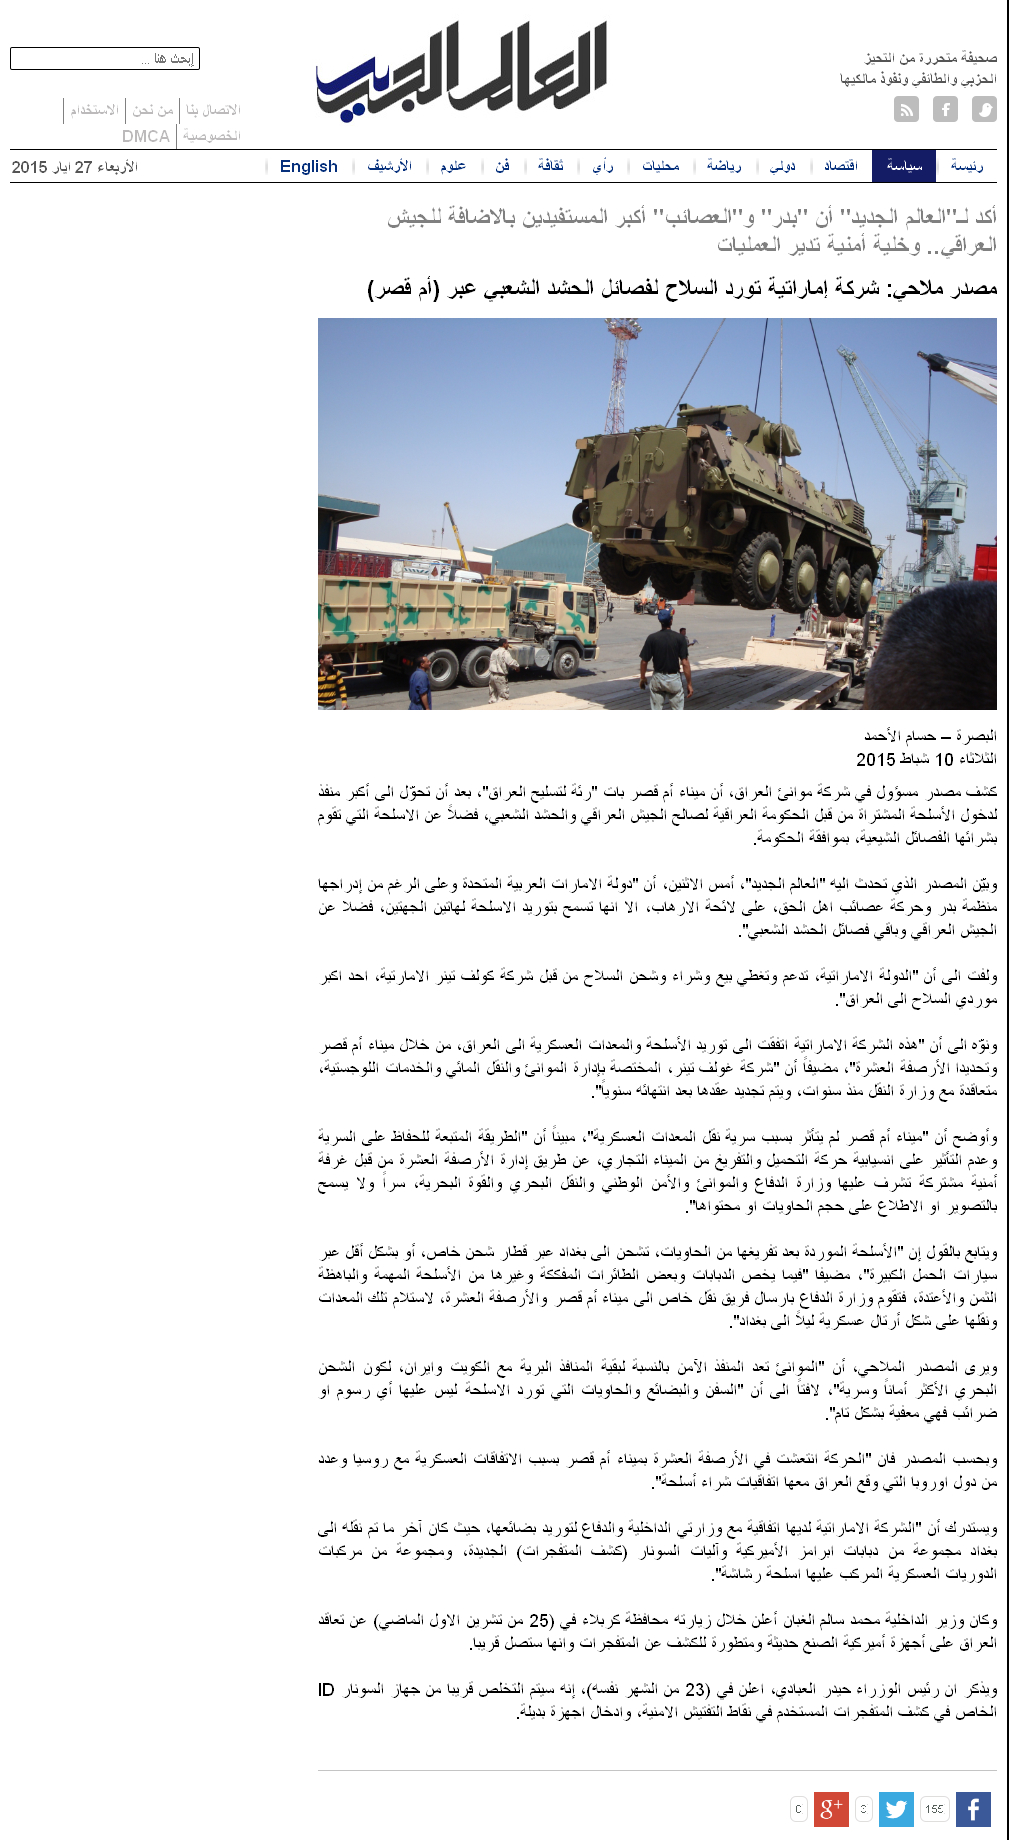 Screenshot of story about Iraq's Port of Basra published by al-aalem.com.